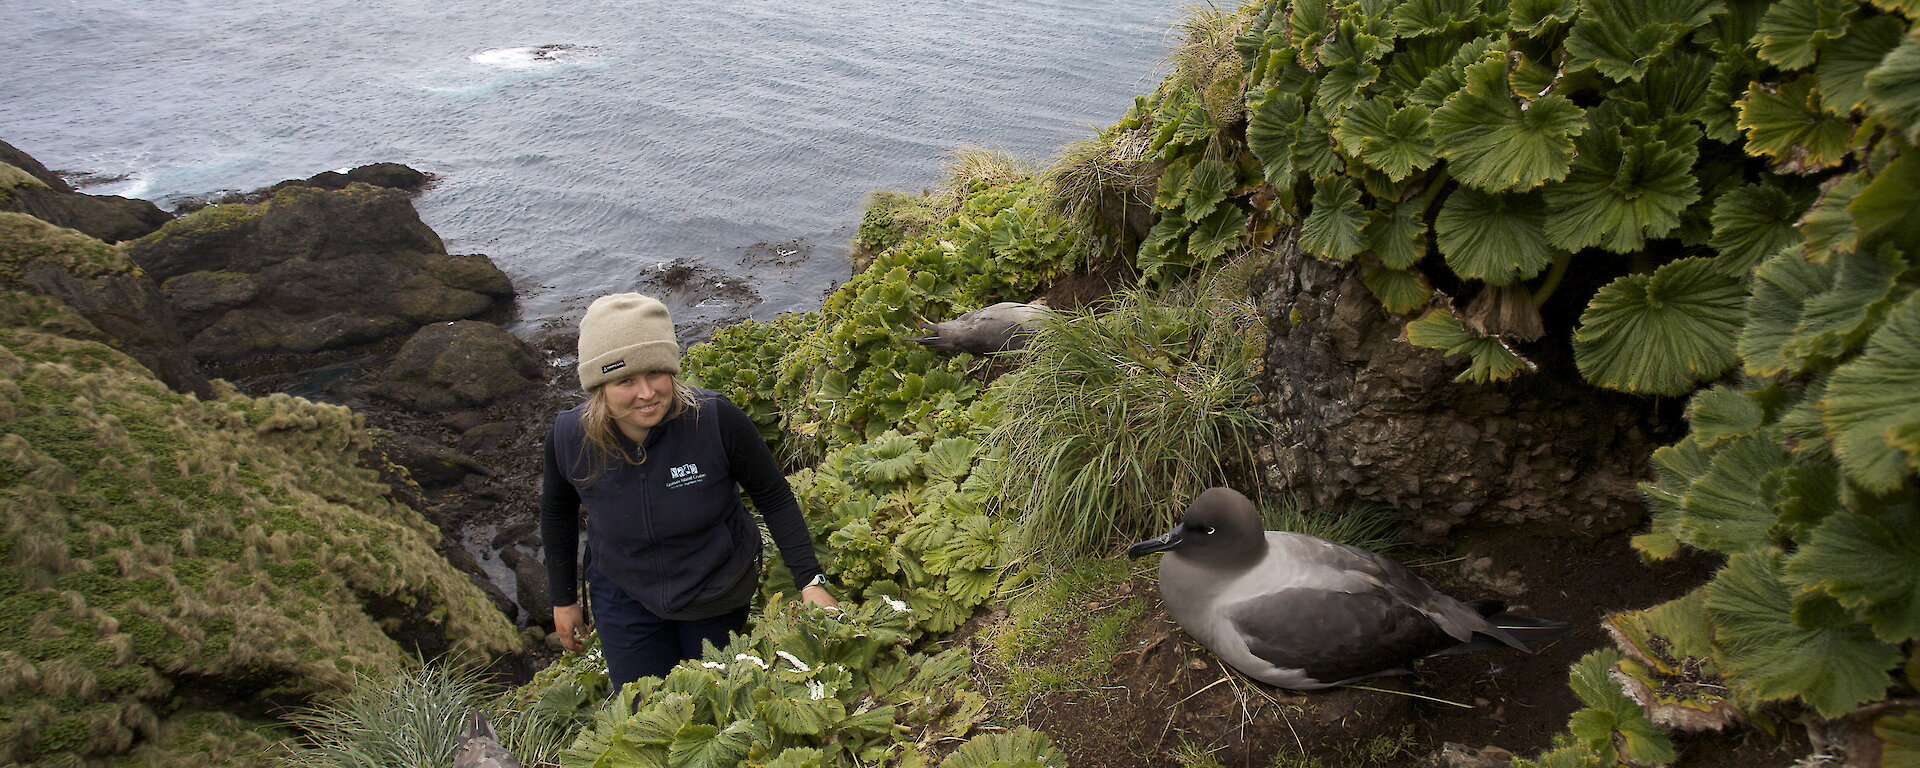 Jaimie Cleeland approaches two sooty albatross on their nests, surrounded by lush vegetation on Macquarie Island.